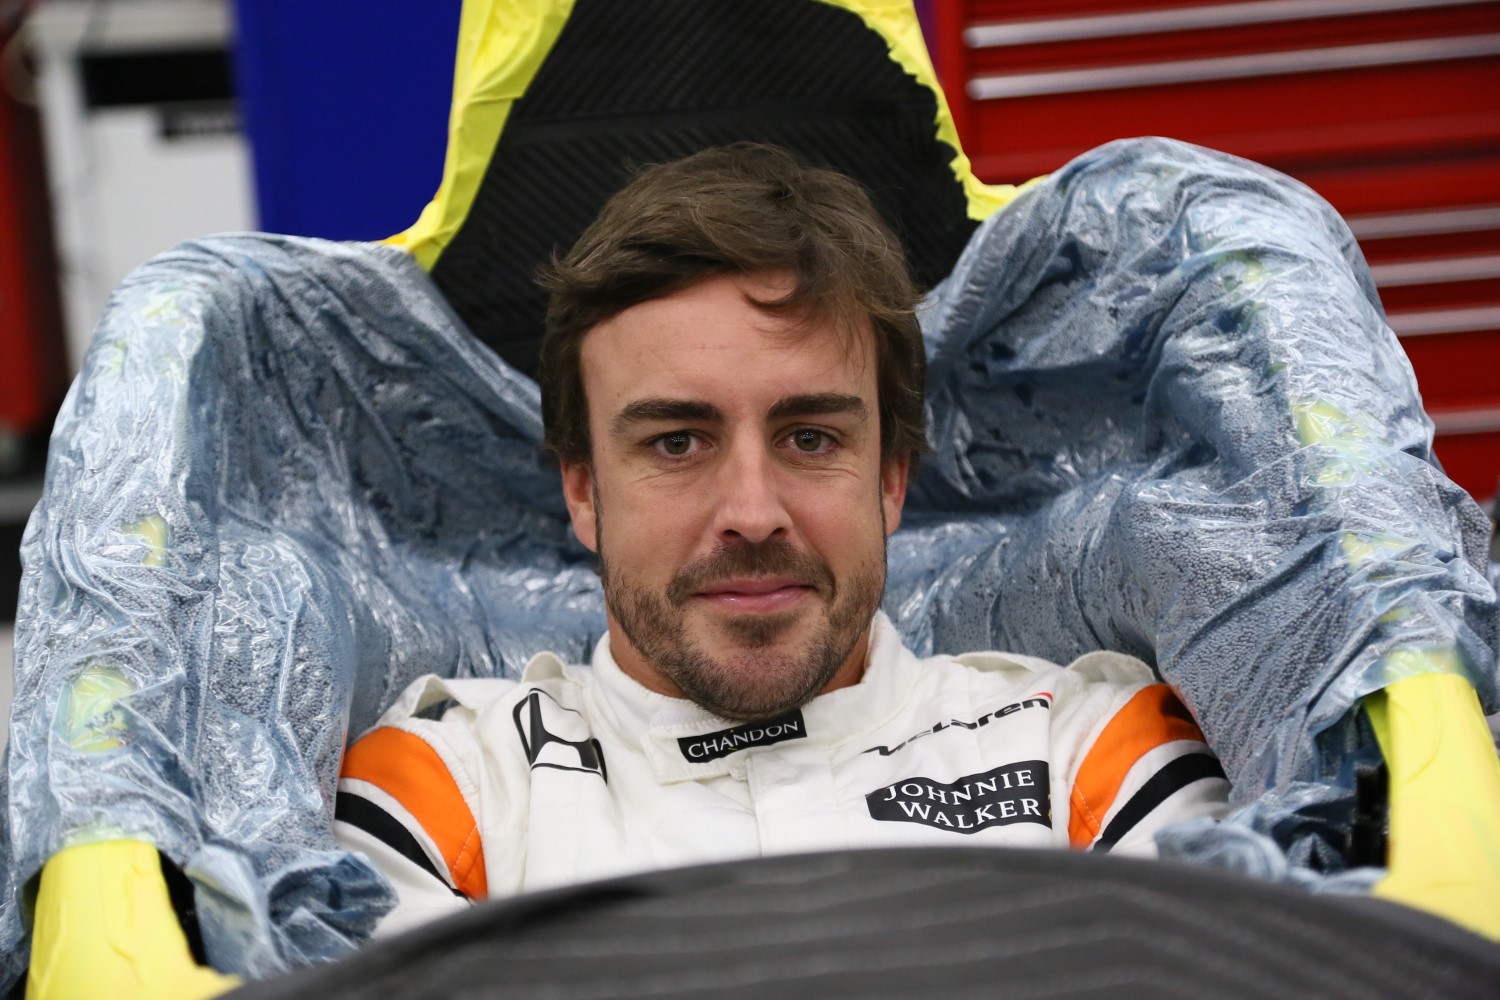 Alonso received a warm welcome from Americans